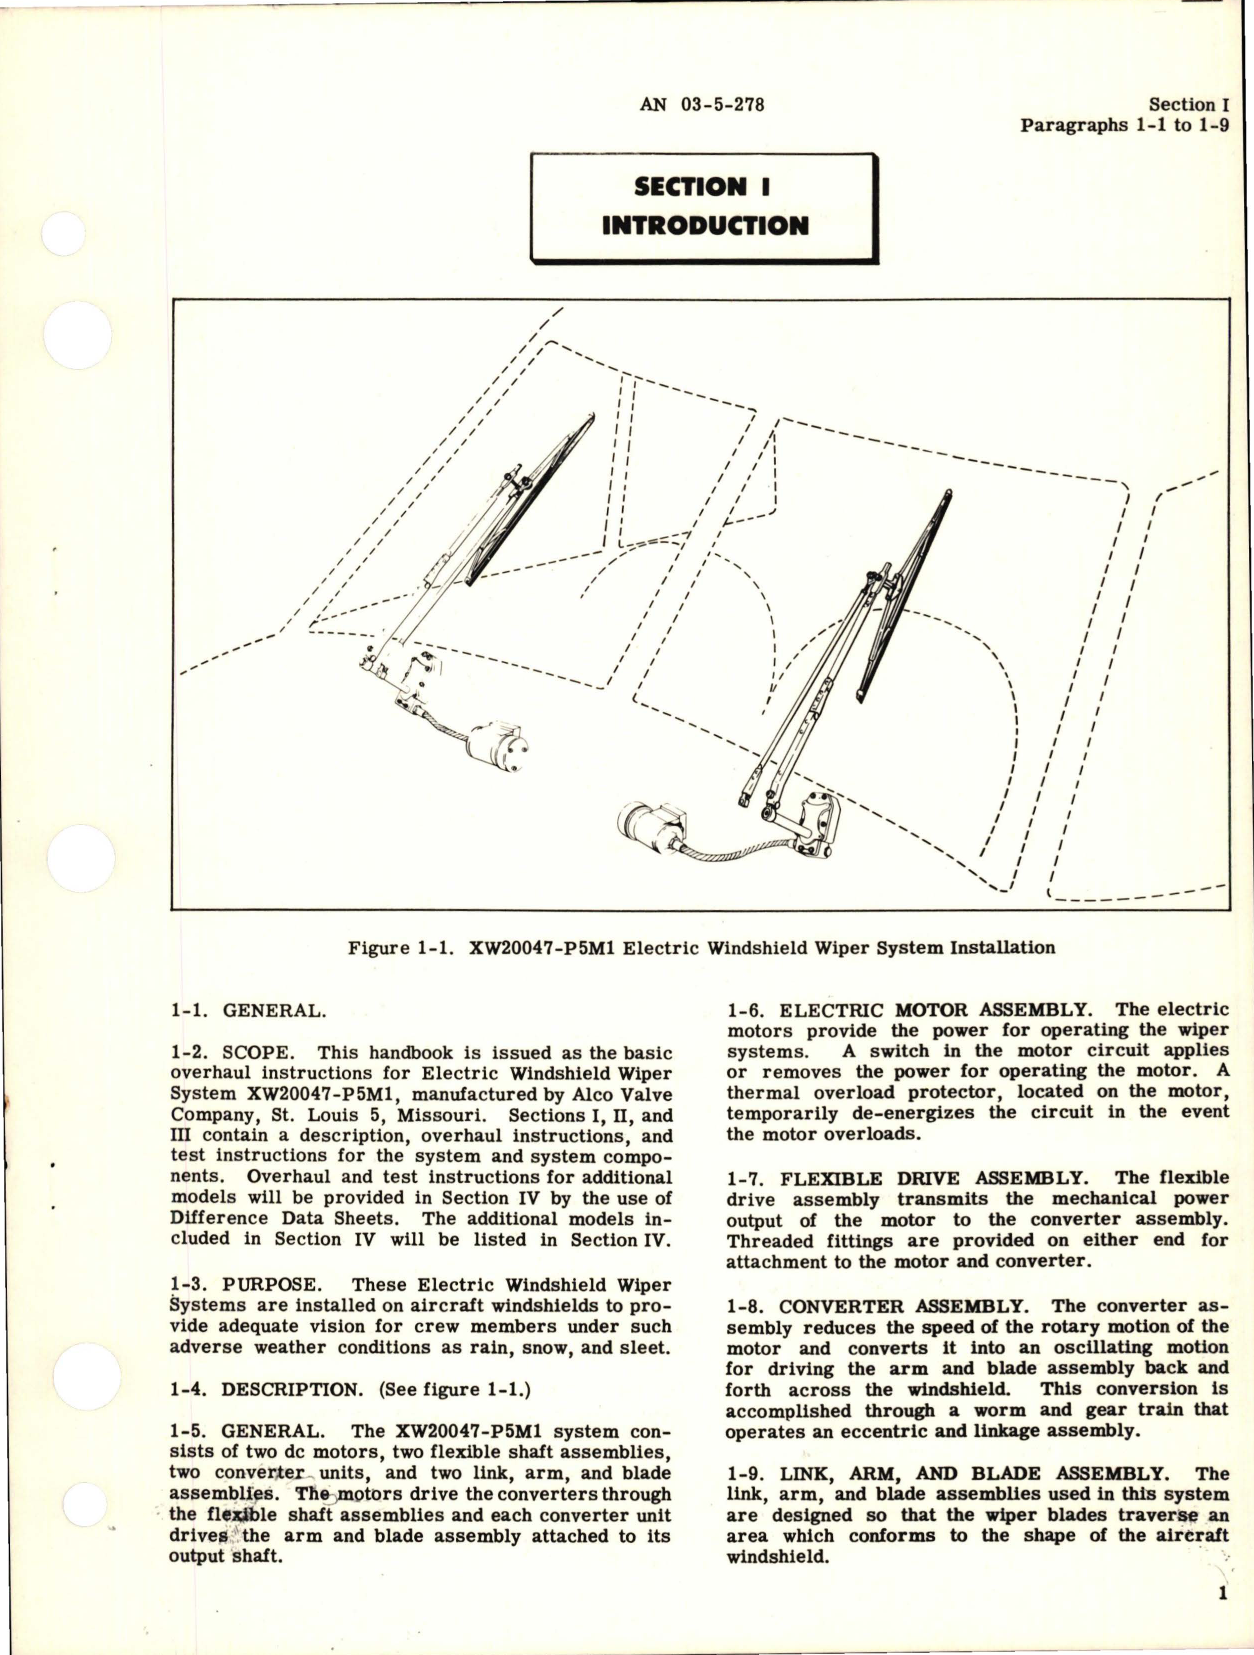 Sample page 5 from AirCorps Library document: Overhaul Instructions for Electric Windshield Wiper System - Model XW 20047-P5M1 